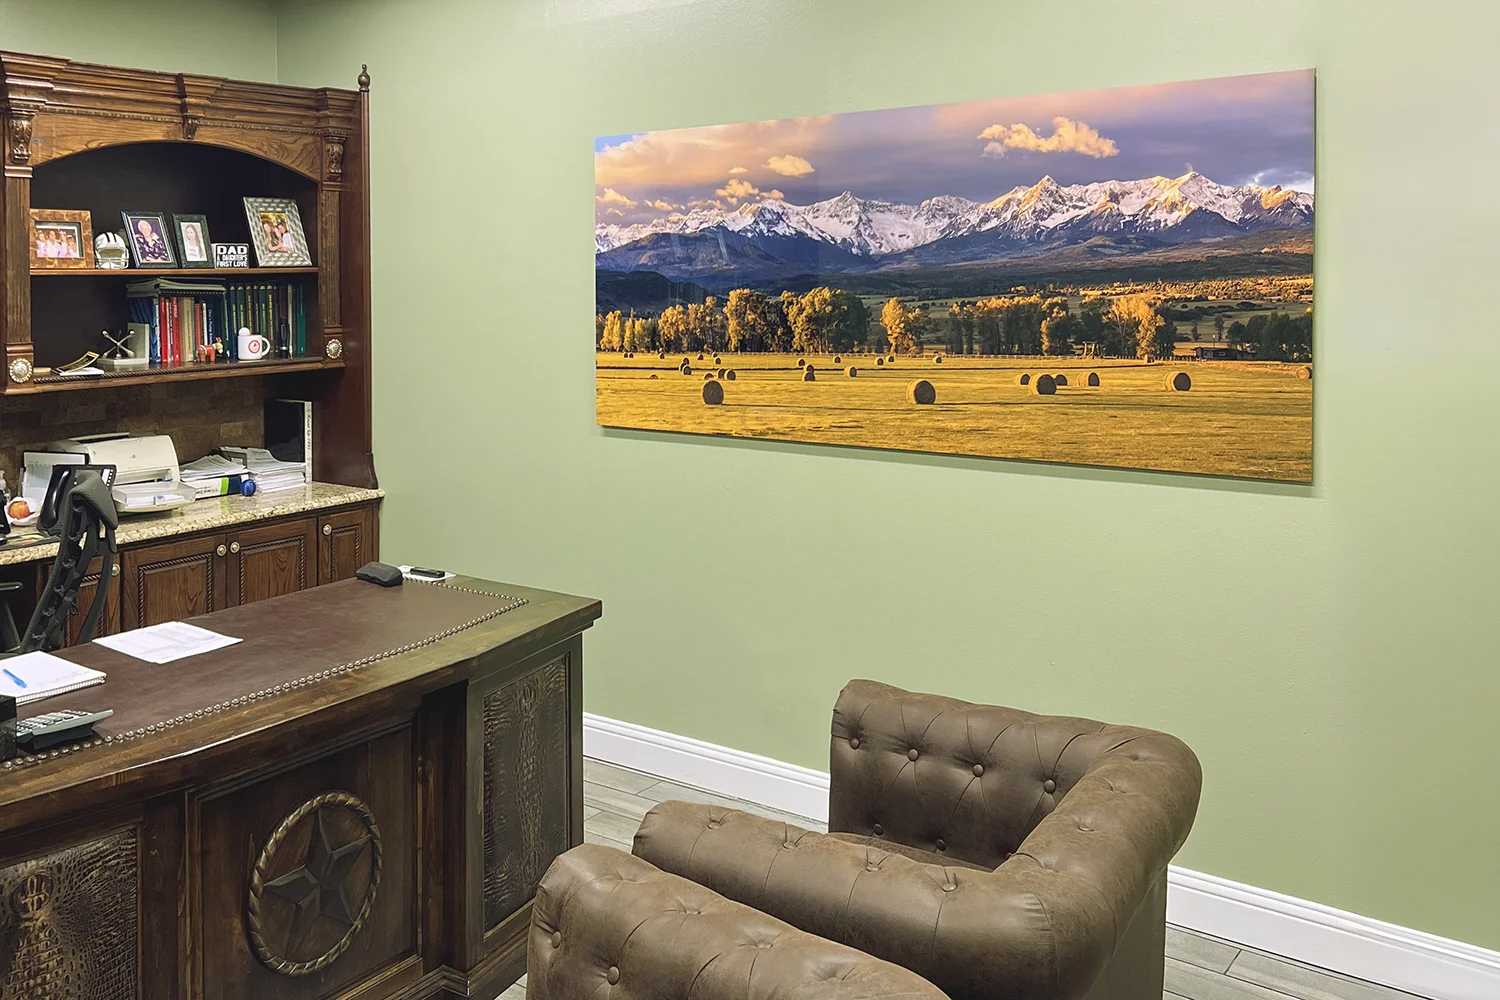 Bringing the Majesty of the Colorado Rockies into the Executive Suite